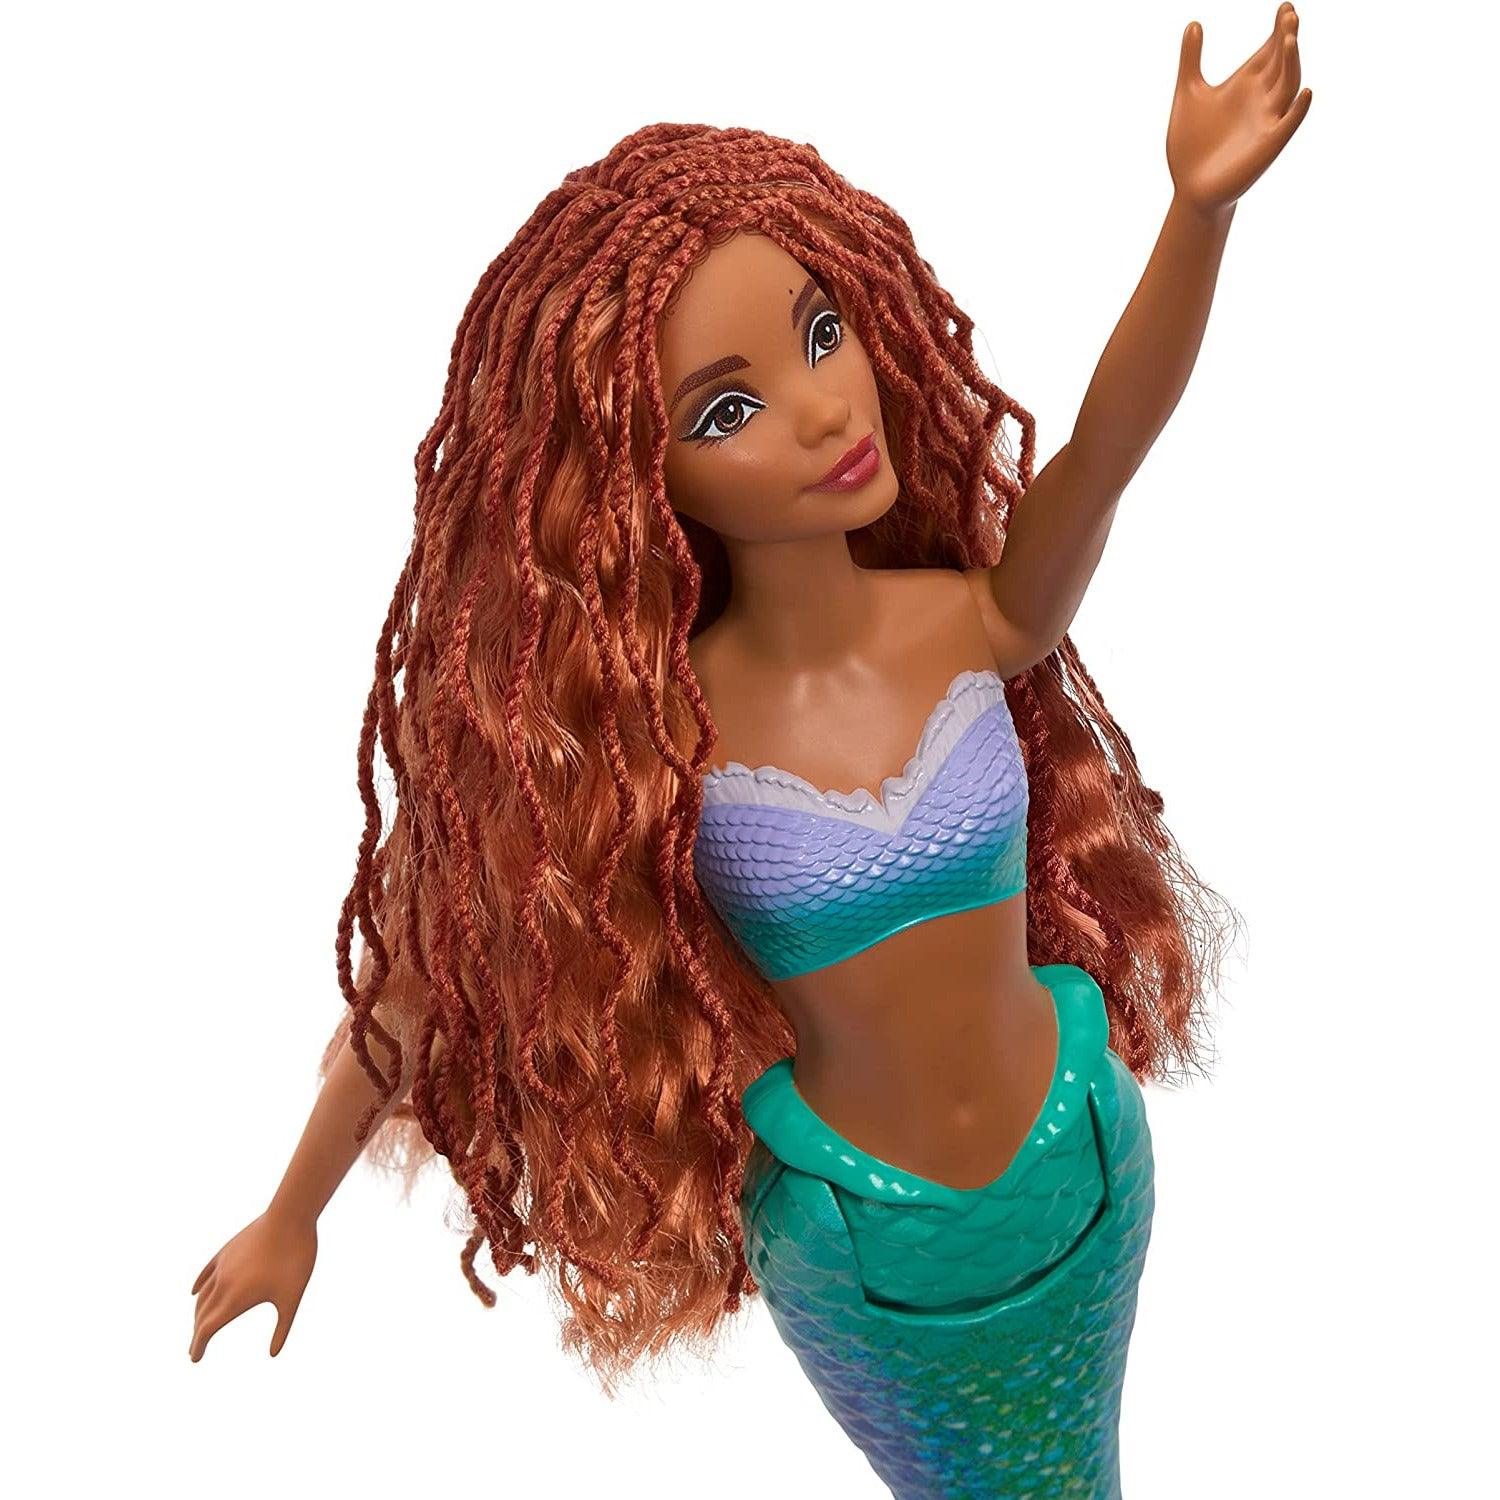 Disney The Little Mermaid Ariel Doll, Mermaid Fashion Doll with Signature Outfit, Toys Inspired by Disney’s The Little Mermaid - BumbleToys - 5-7 Years, Fashion Dolls & Accessories, Girls, Mermaid, Pre-Order